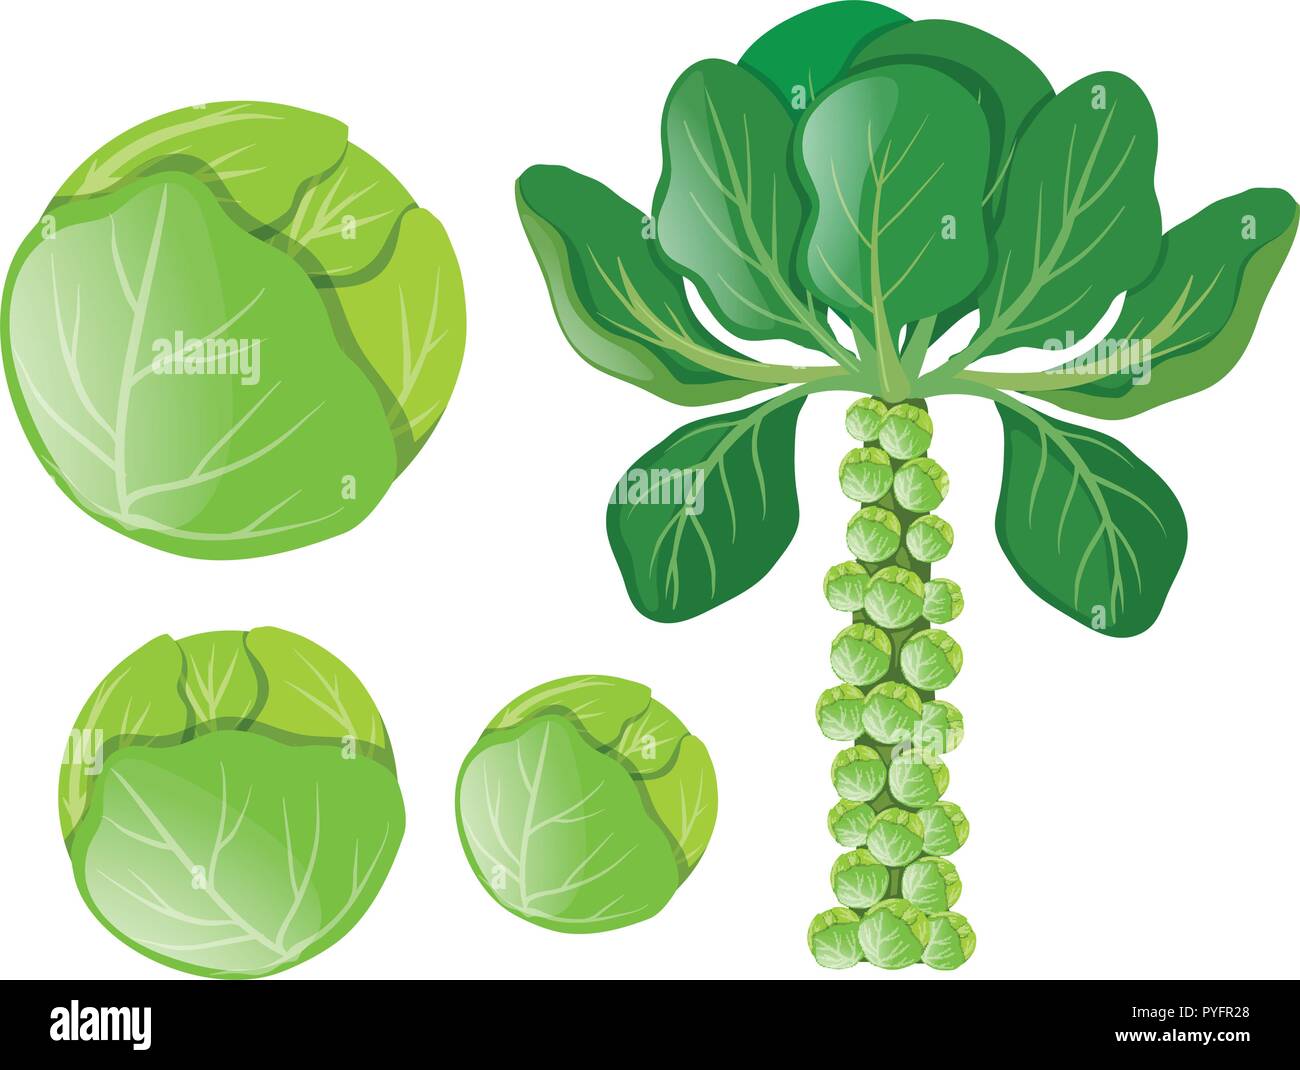 Green cabbages and brussel sprouts illustration Stock Vector